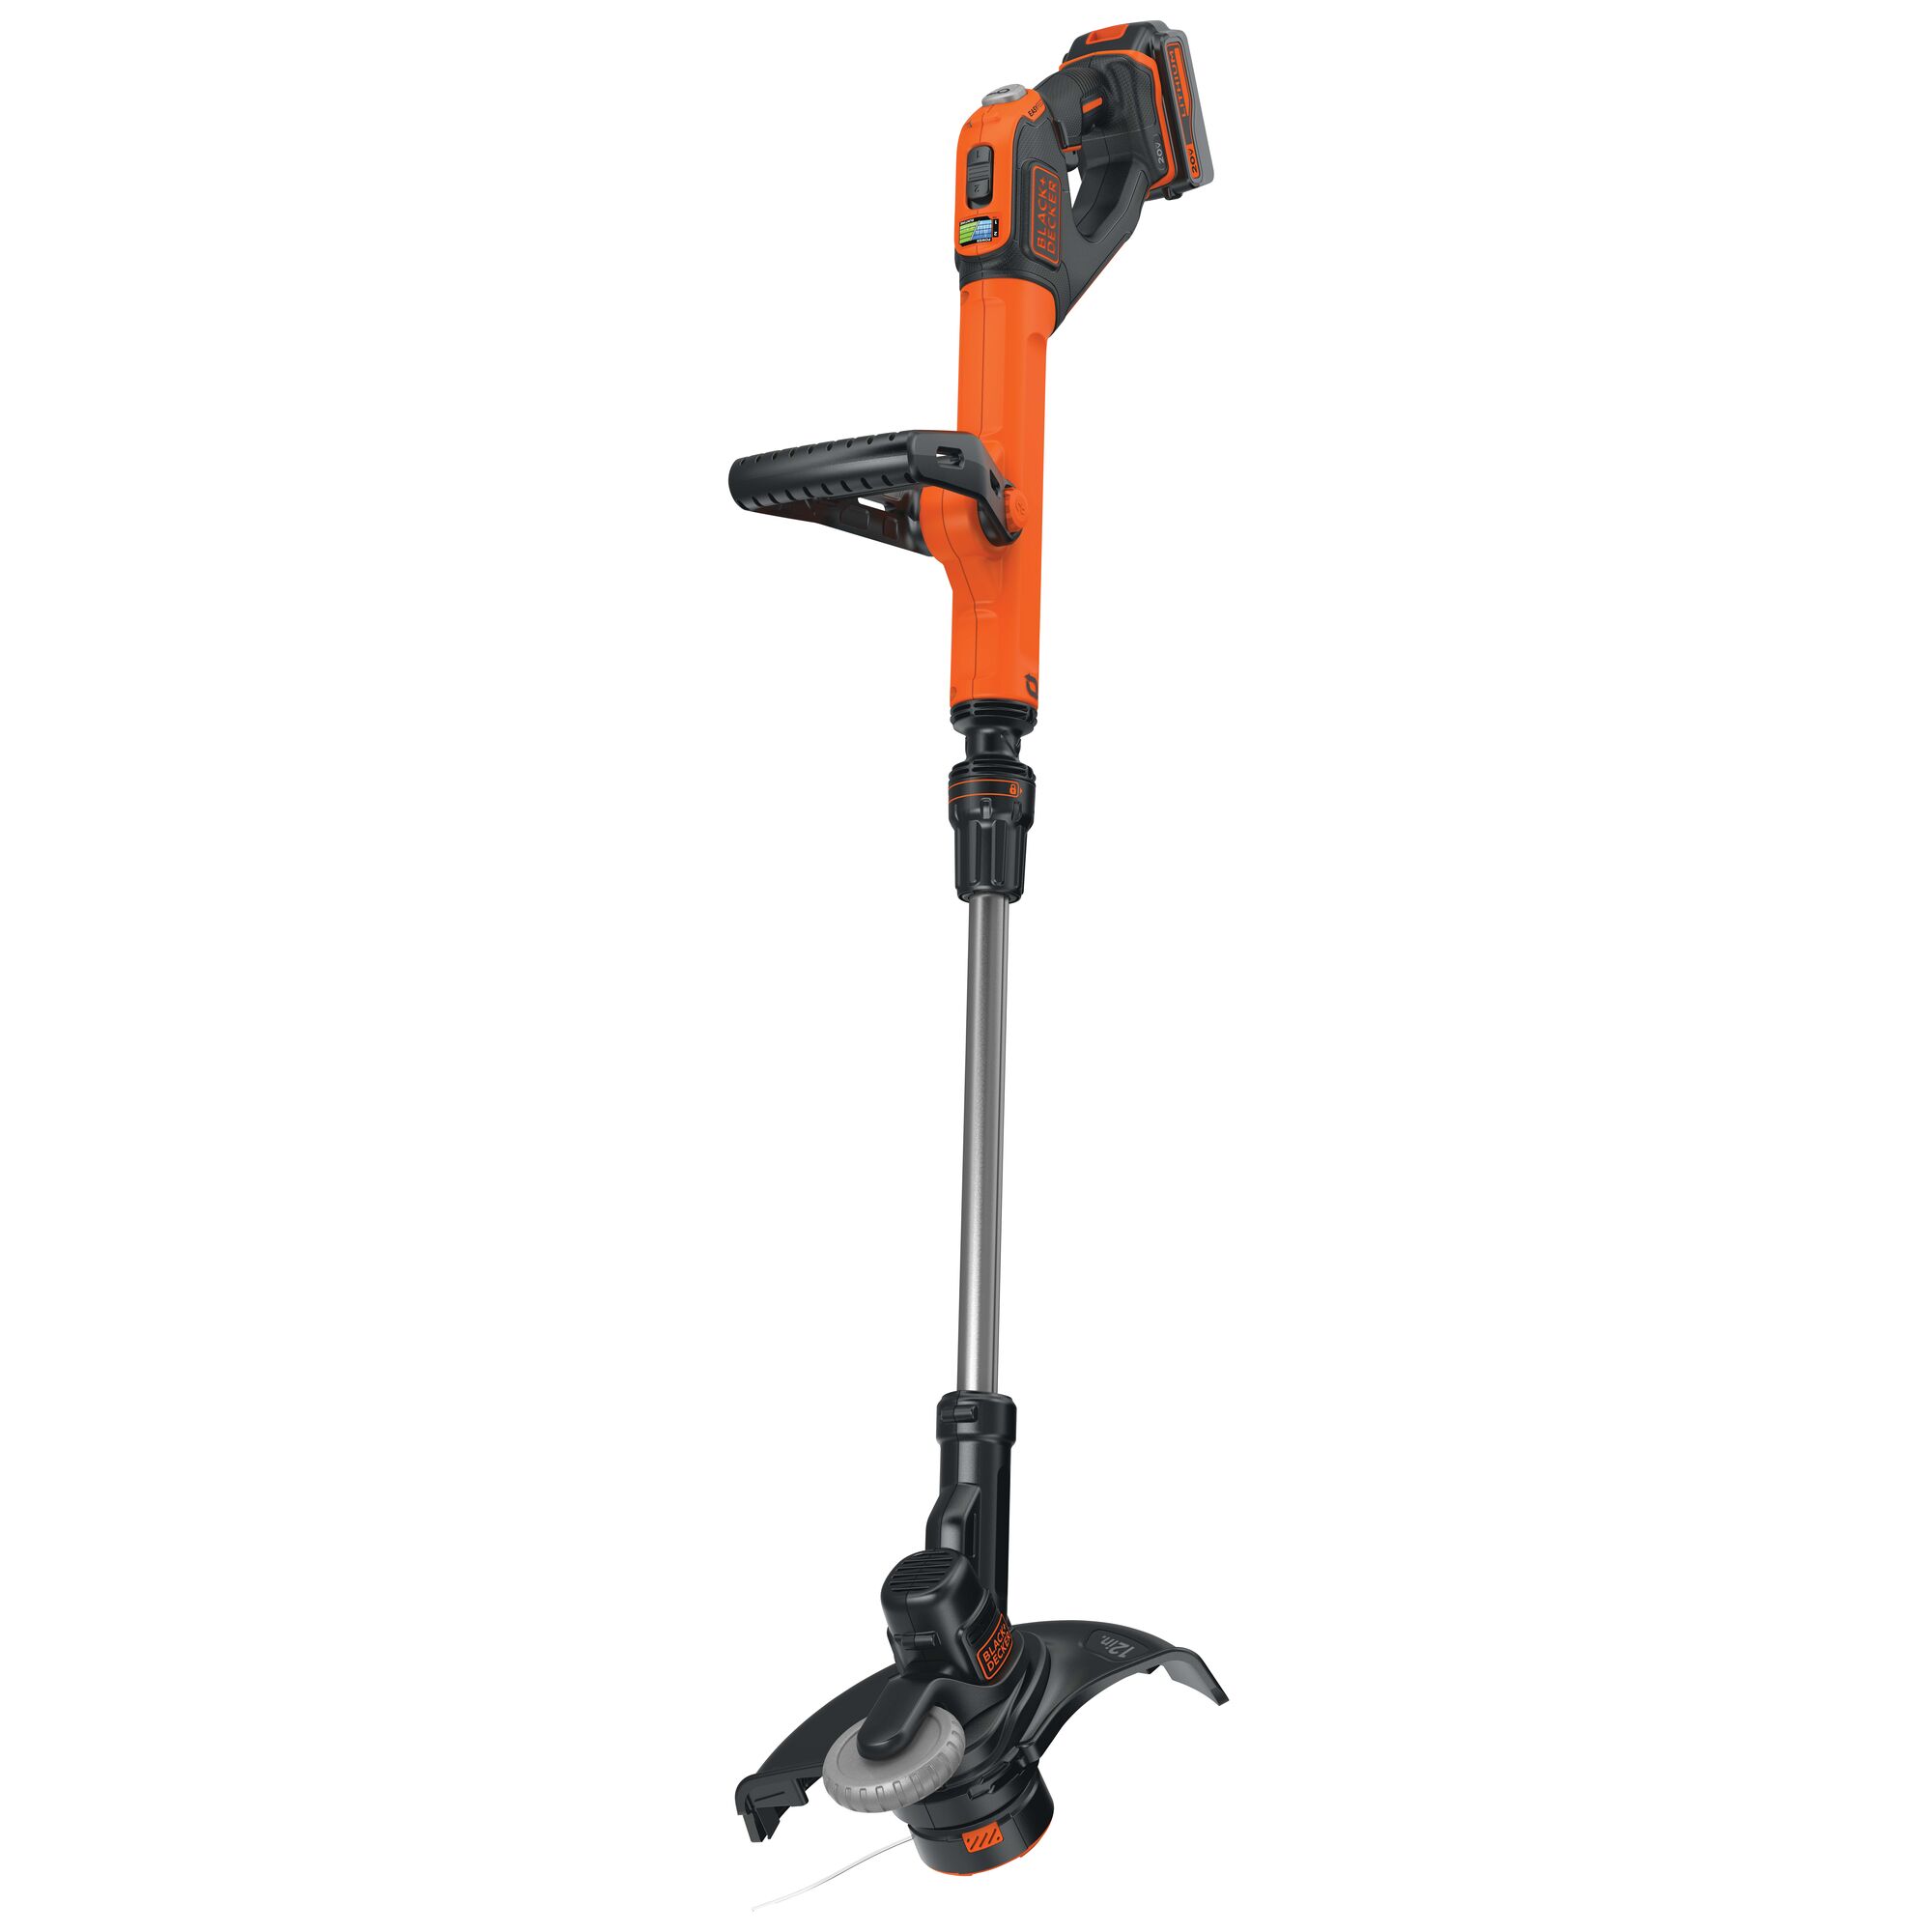 Profile view of 20V Max Lithium Easyfeed string Trimmer/Edger on white background.